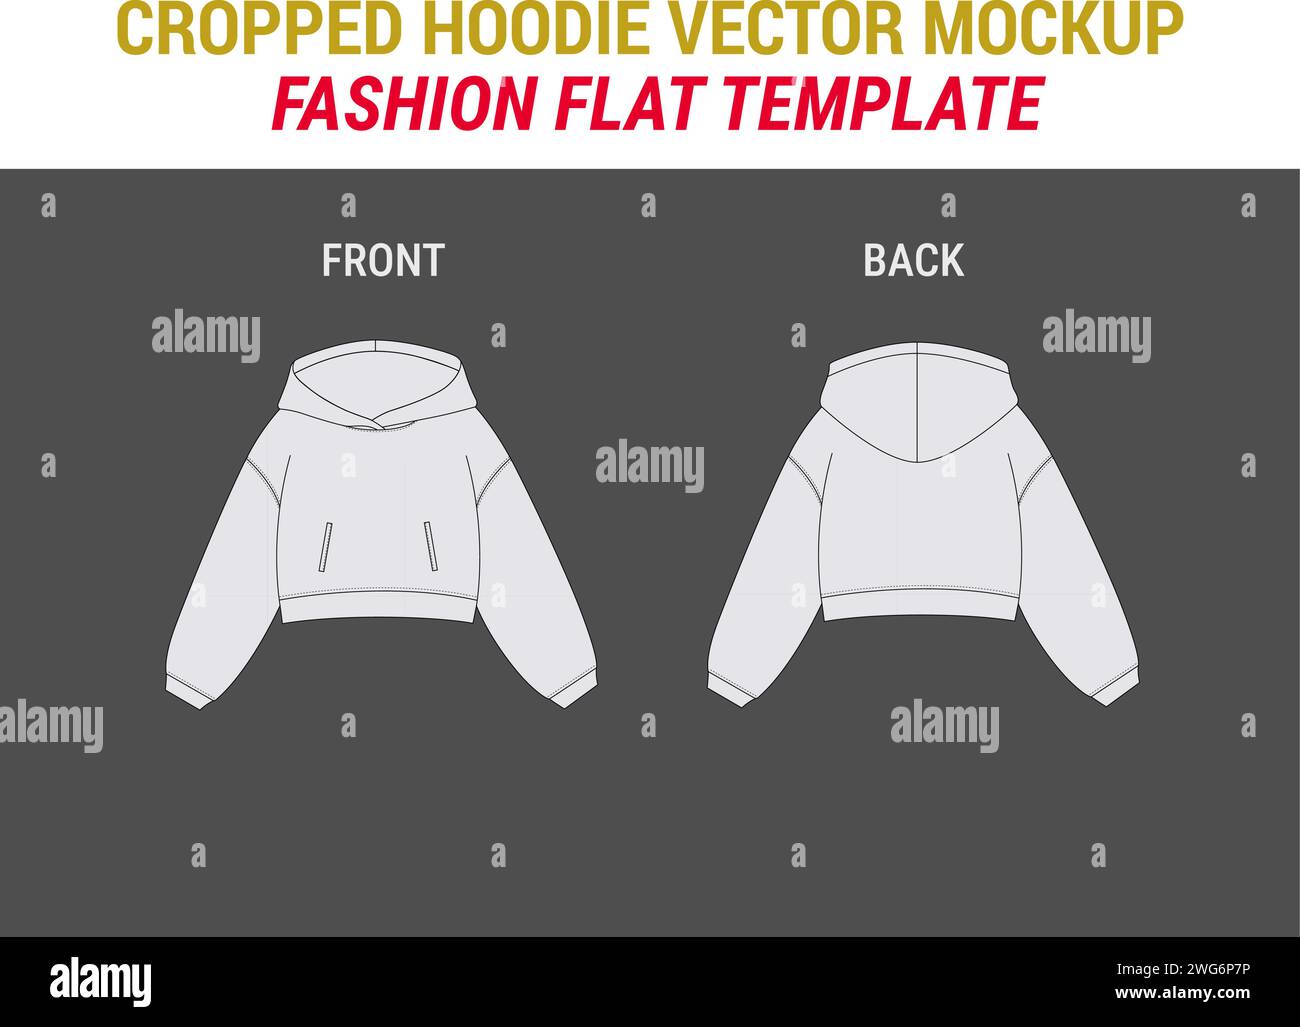 Cropped Sweatshirt Hoodie Design Cropped Hood Vector Fashion Flat Sketch Template Oversize Crop Hoodie Sweat Cropped Hoodie Template Hoodie Mockup Stock Vector